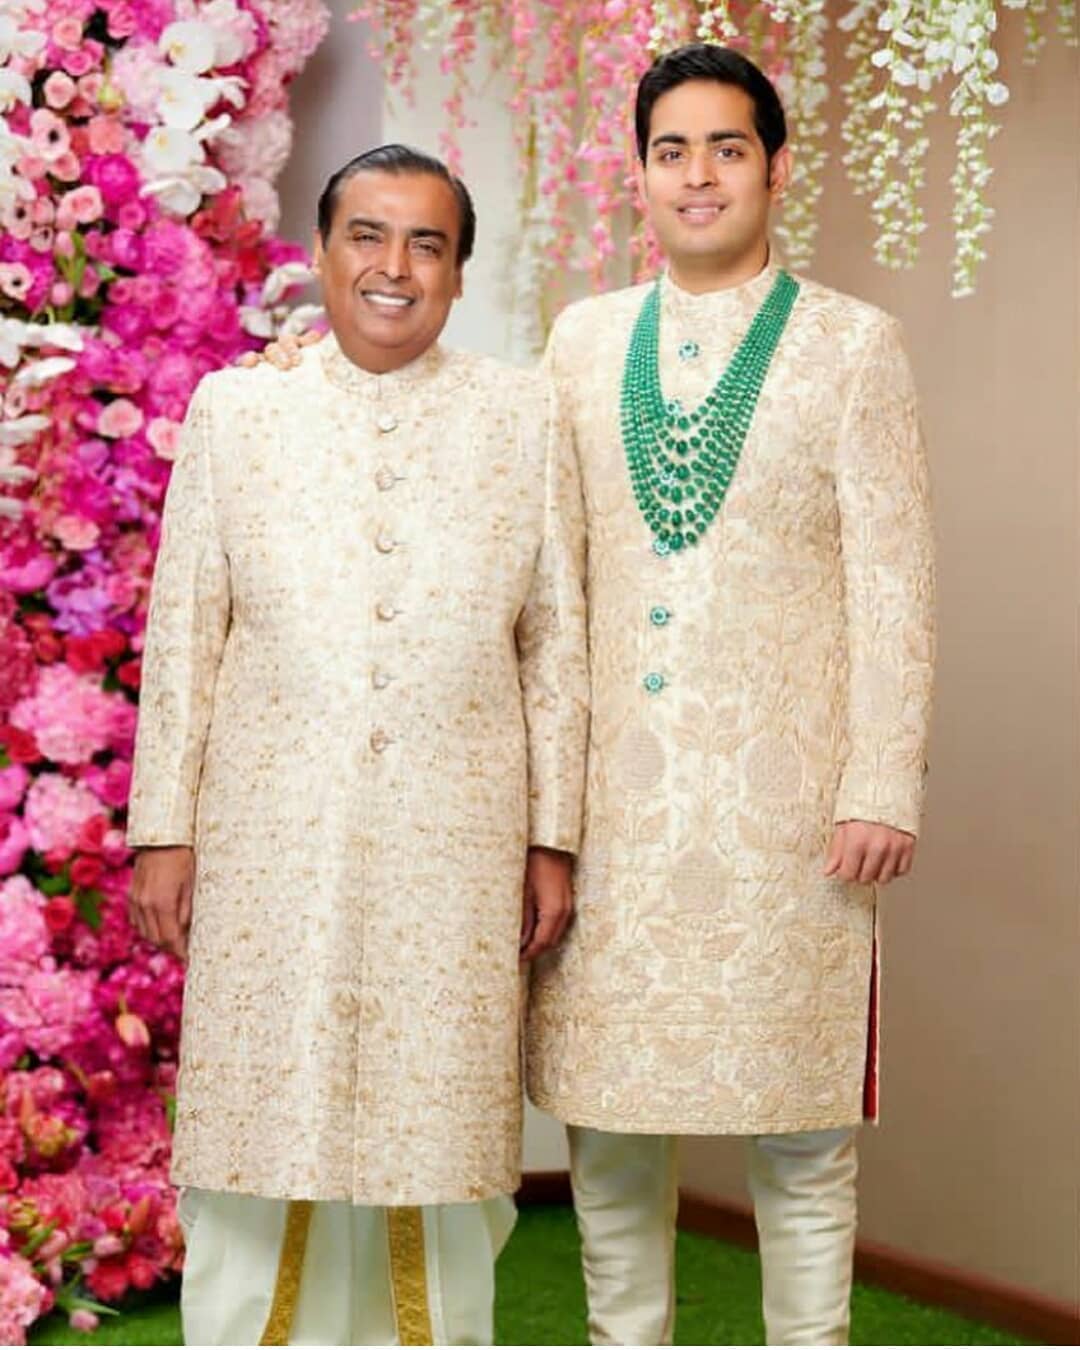 Akash mukesh Ambani is the only Indian to make it to the Time100 Next list